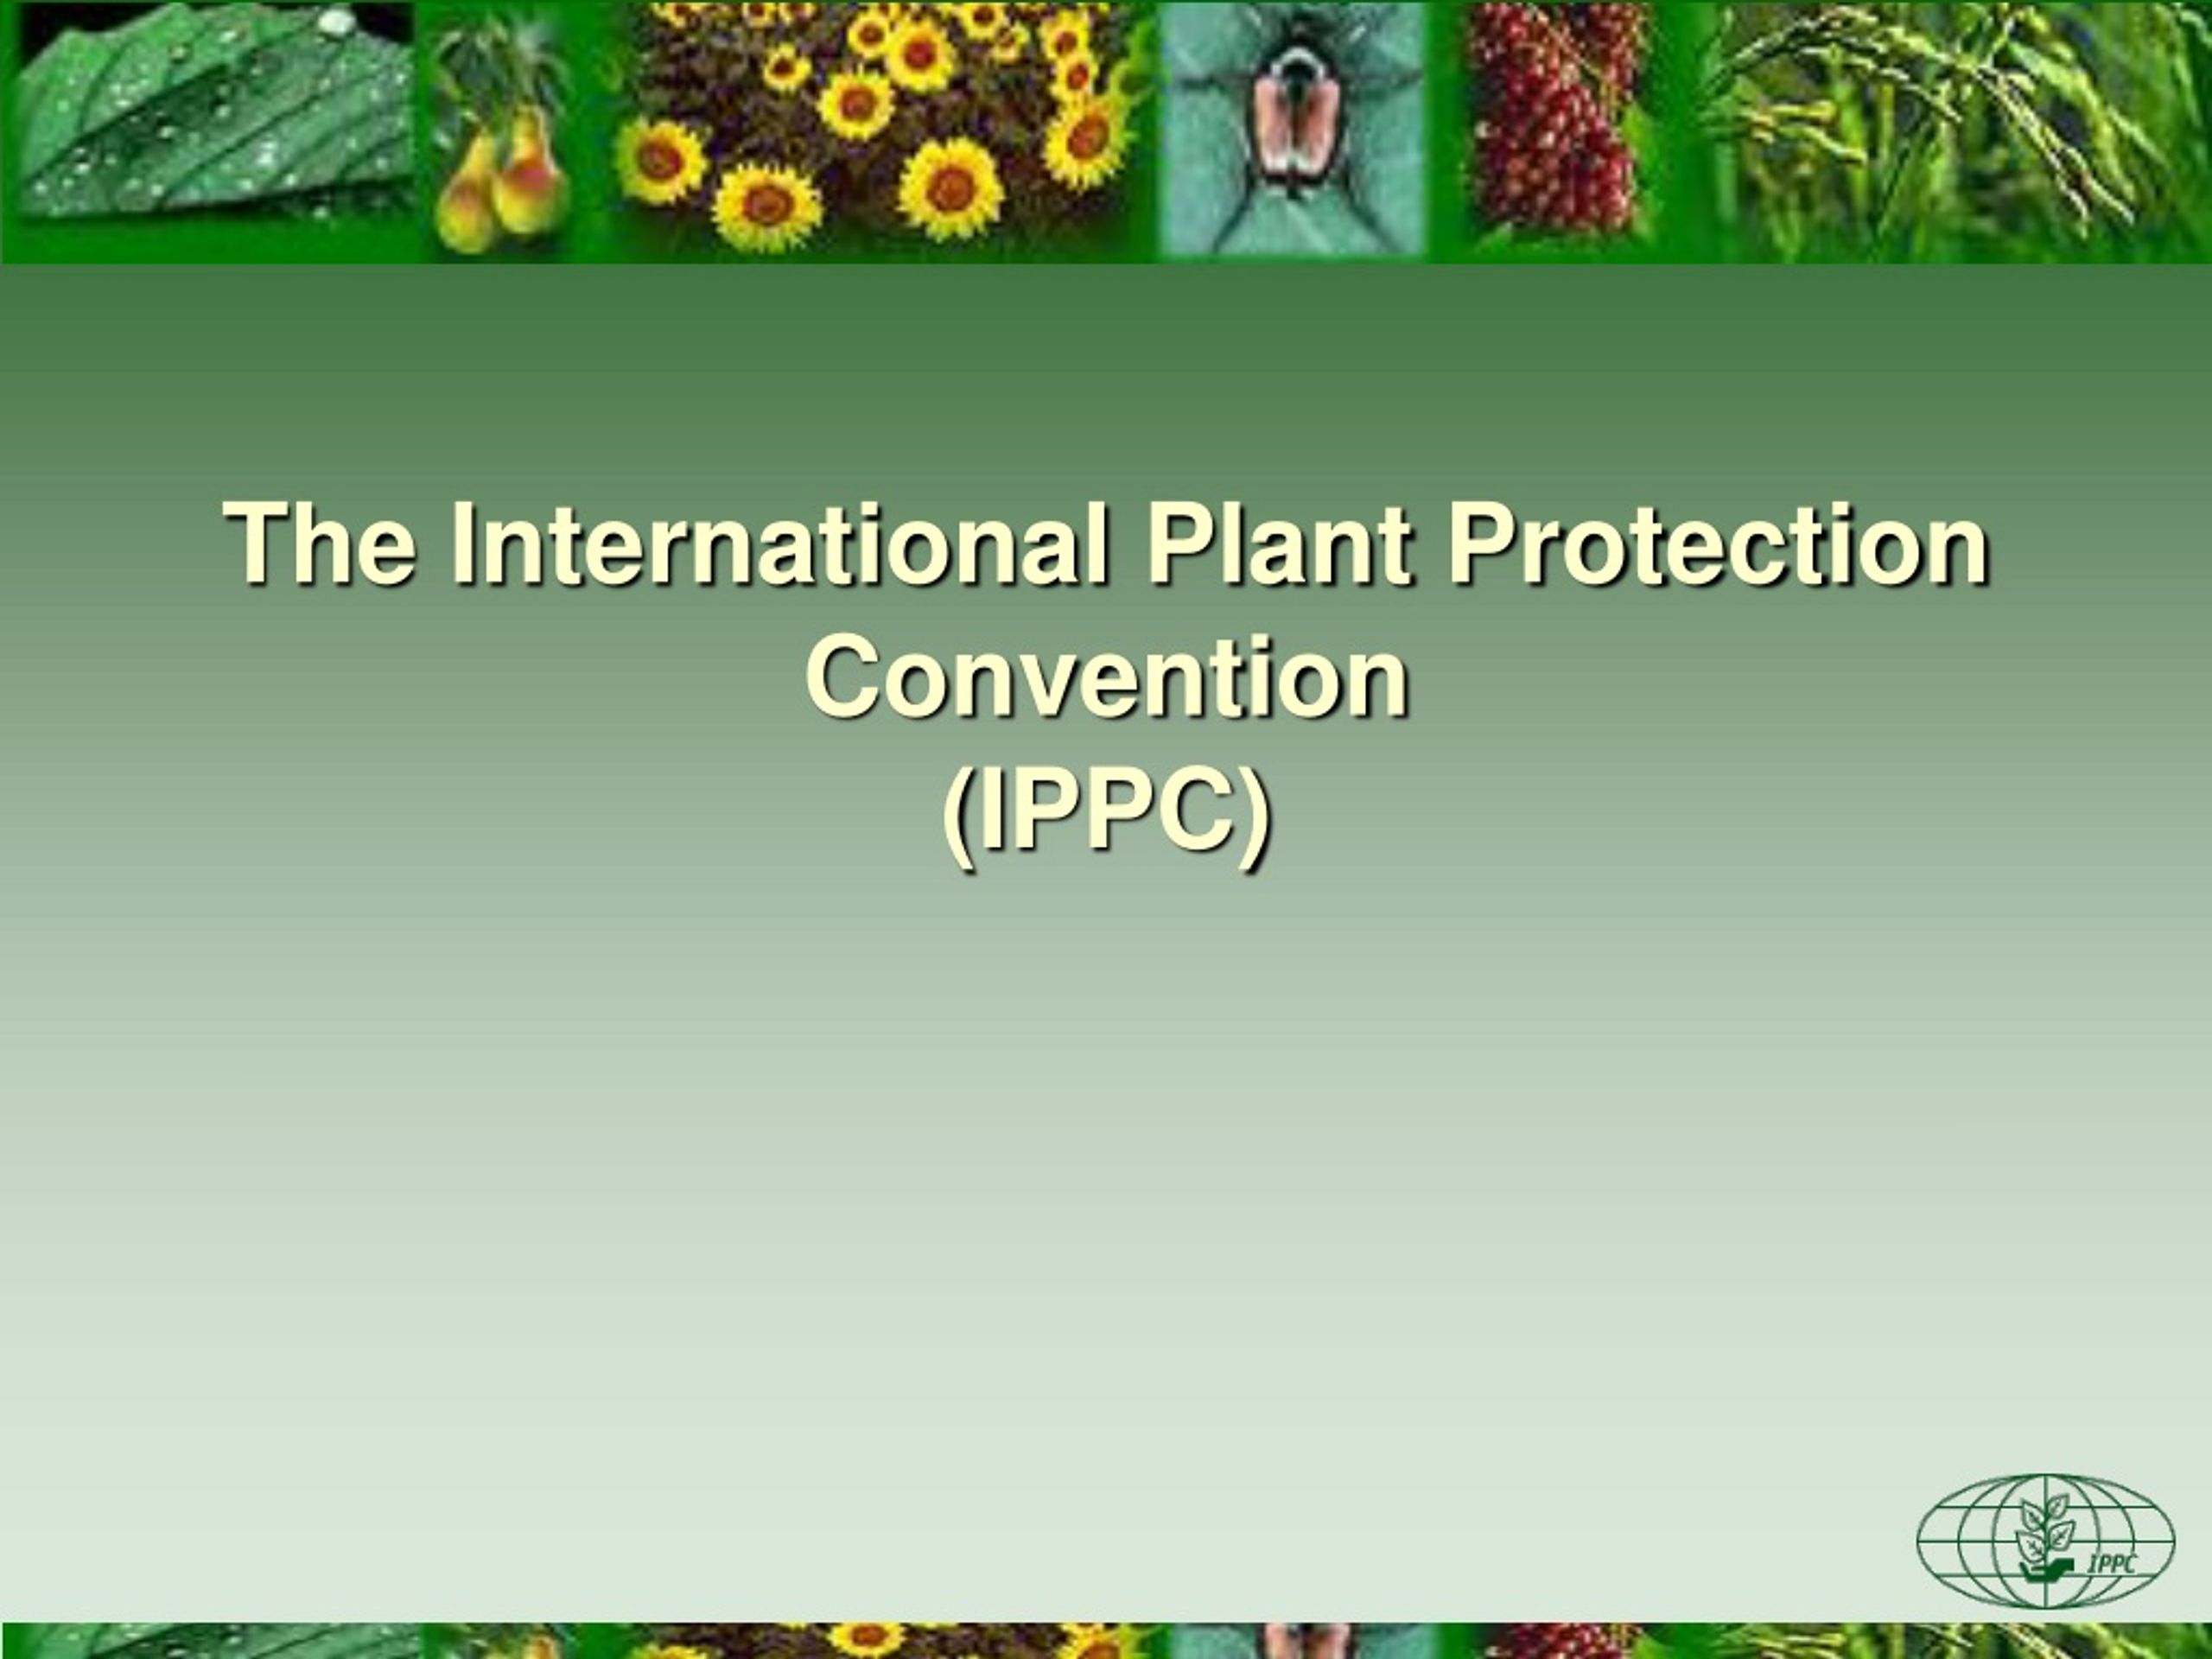 PPT The International Plant Protection Convention (IPPC) PowerPoint